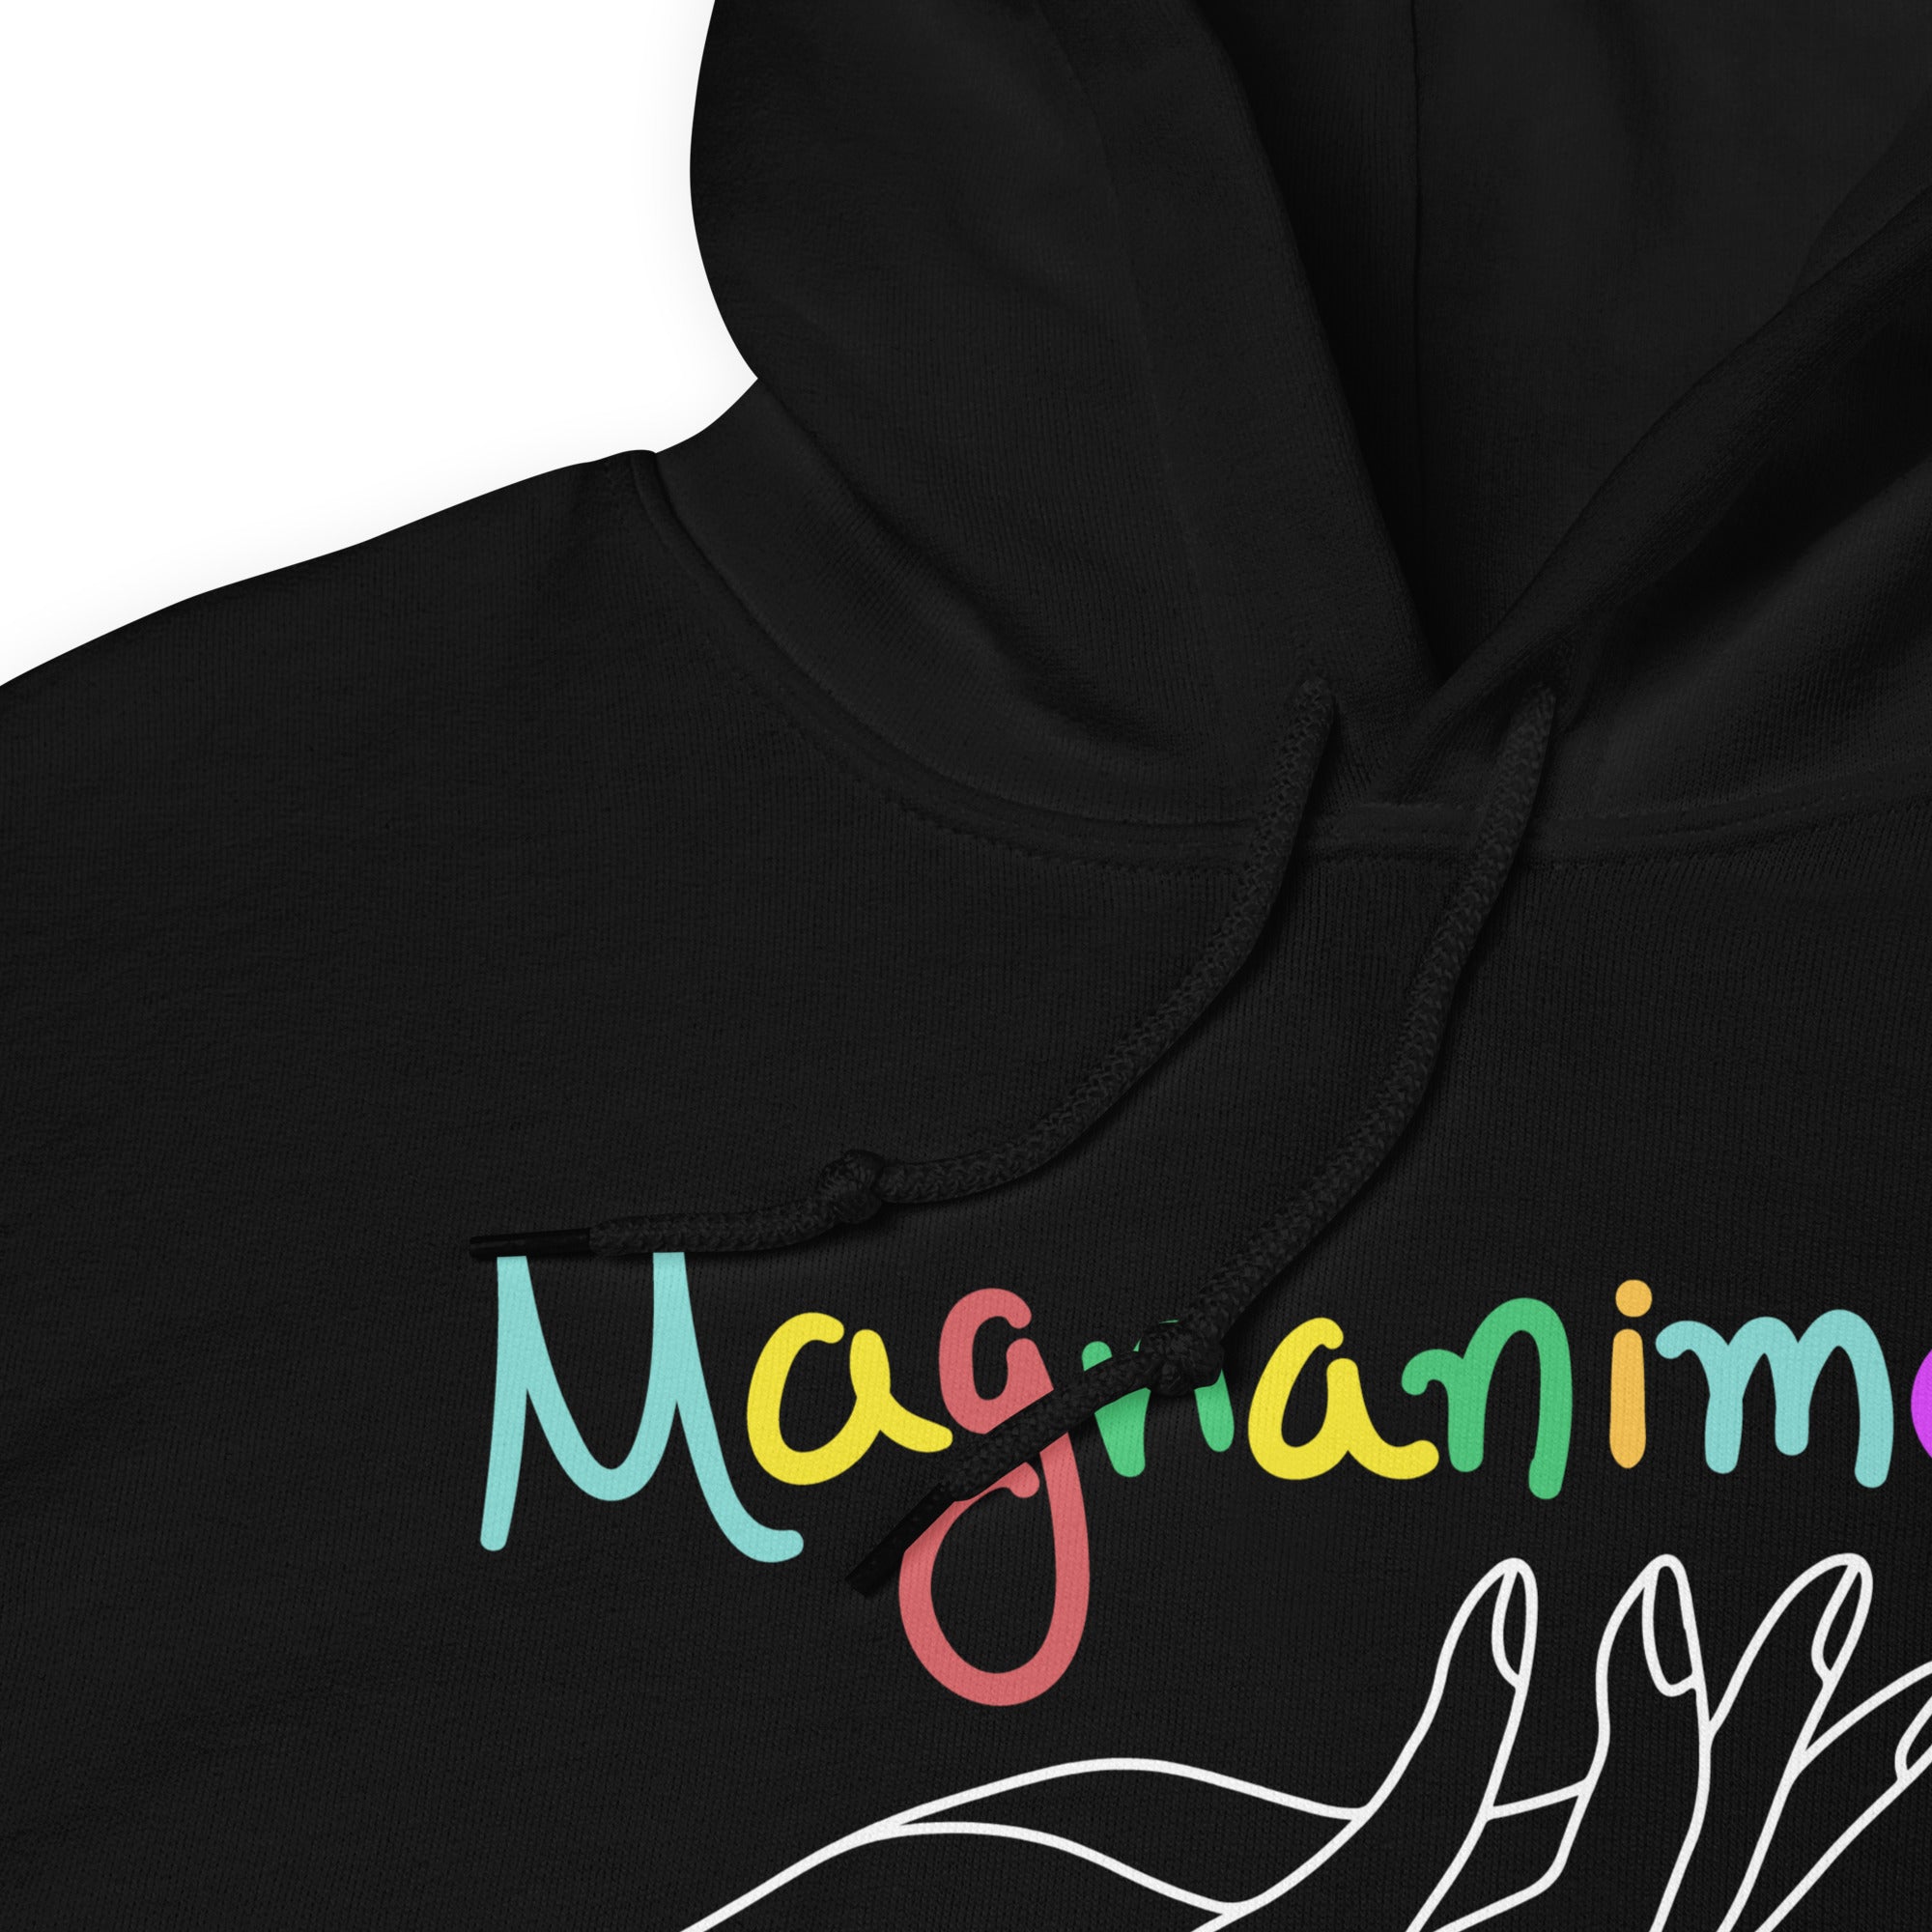 Magnanimous Motivational Hoodie for Women